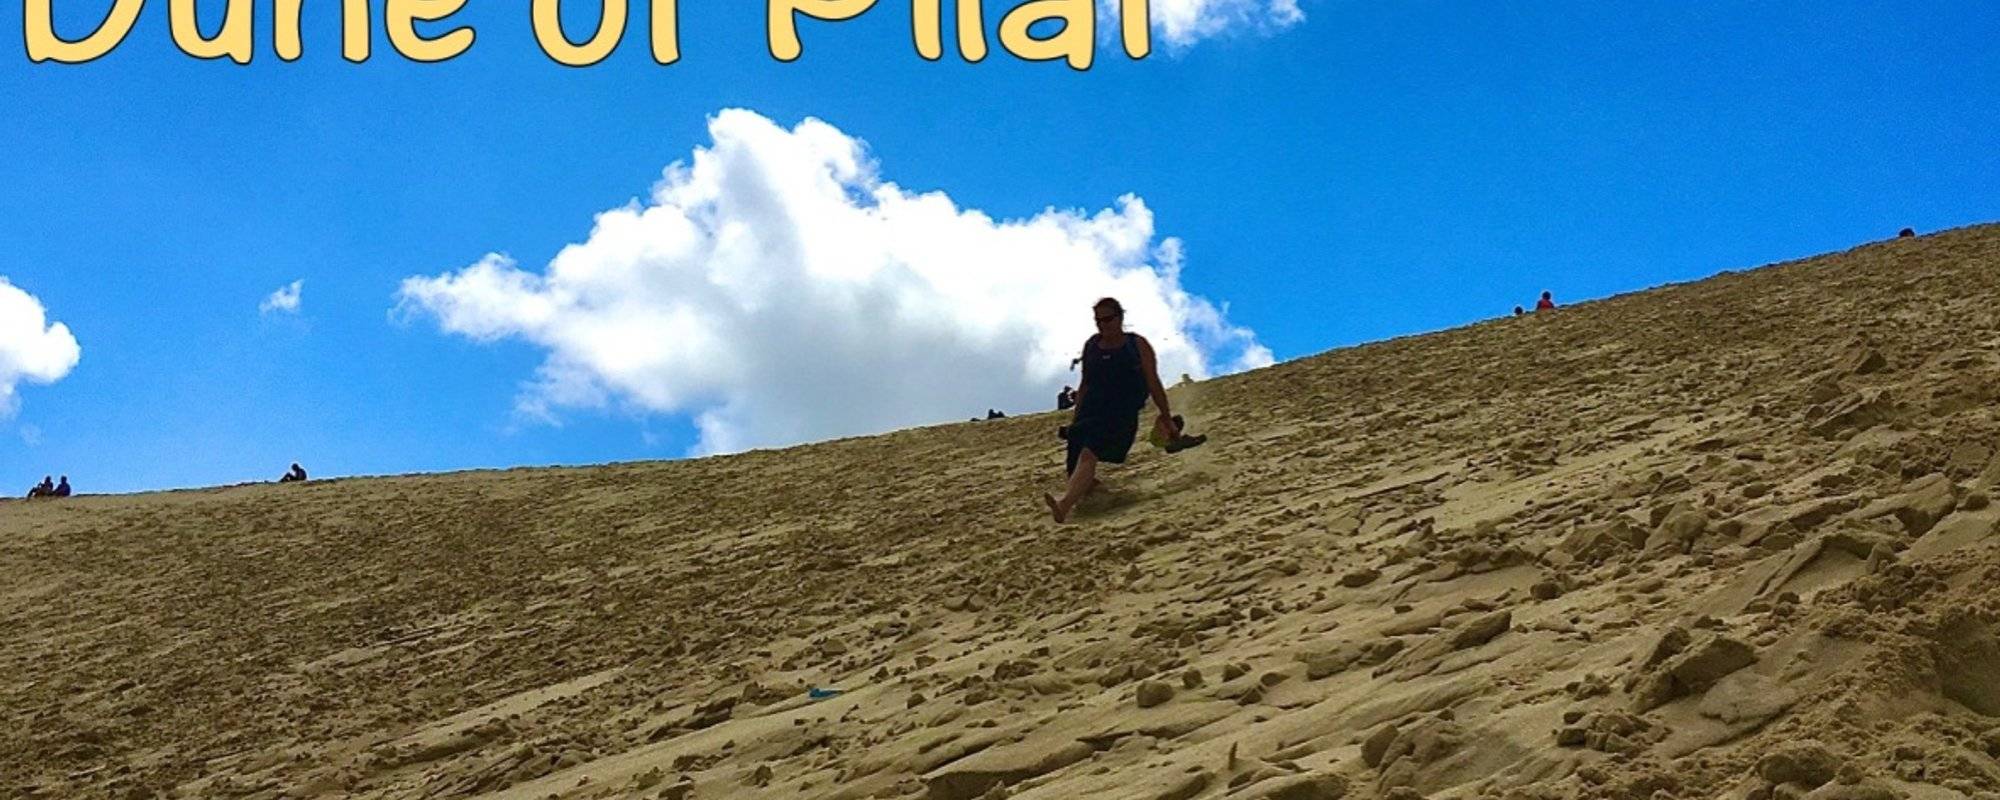 Dune of Pilat - the big moving mountain of sand